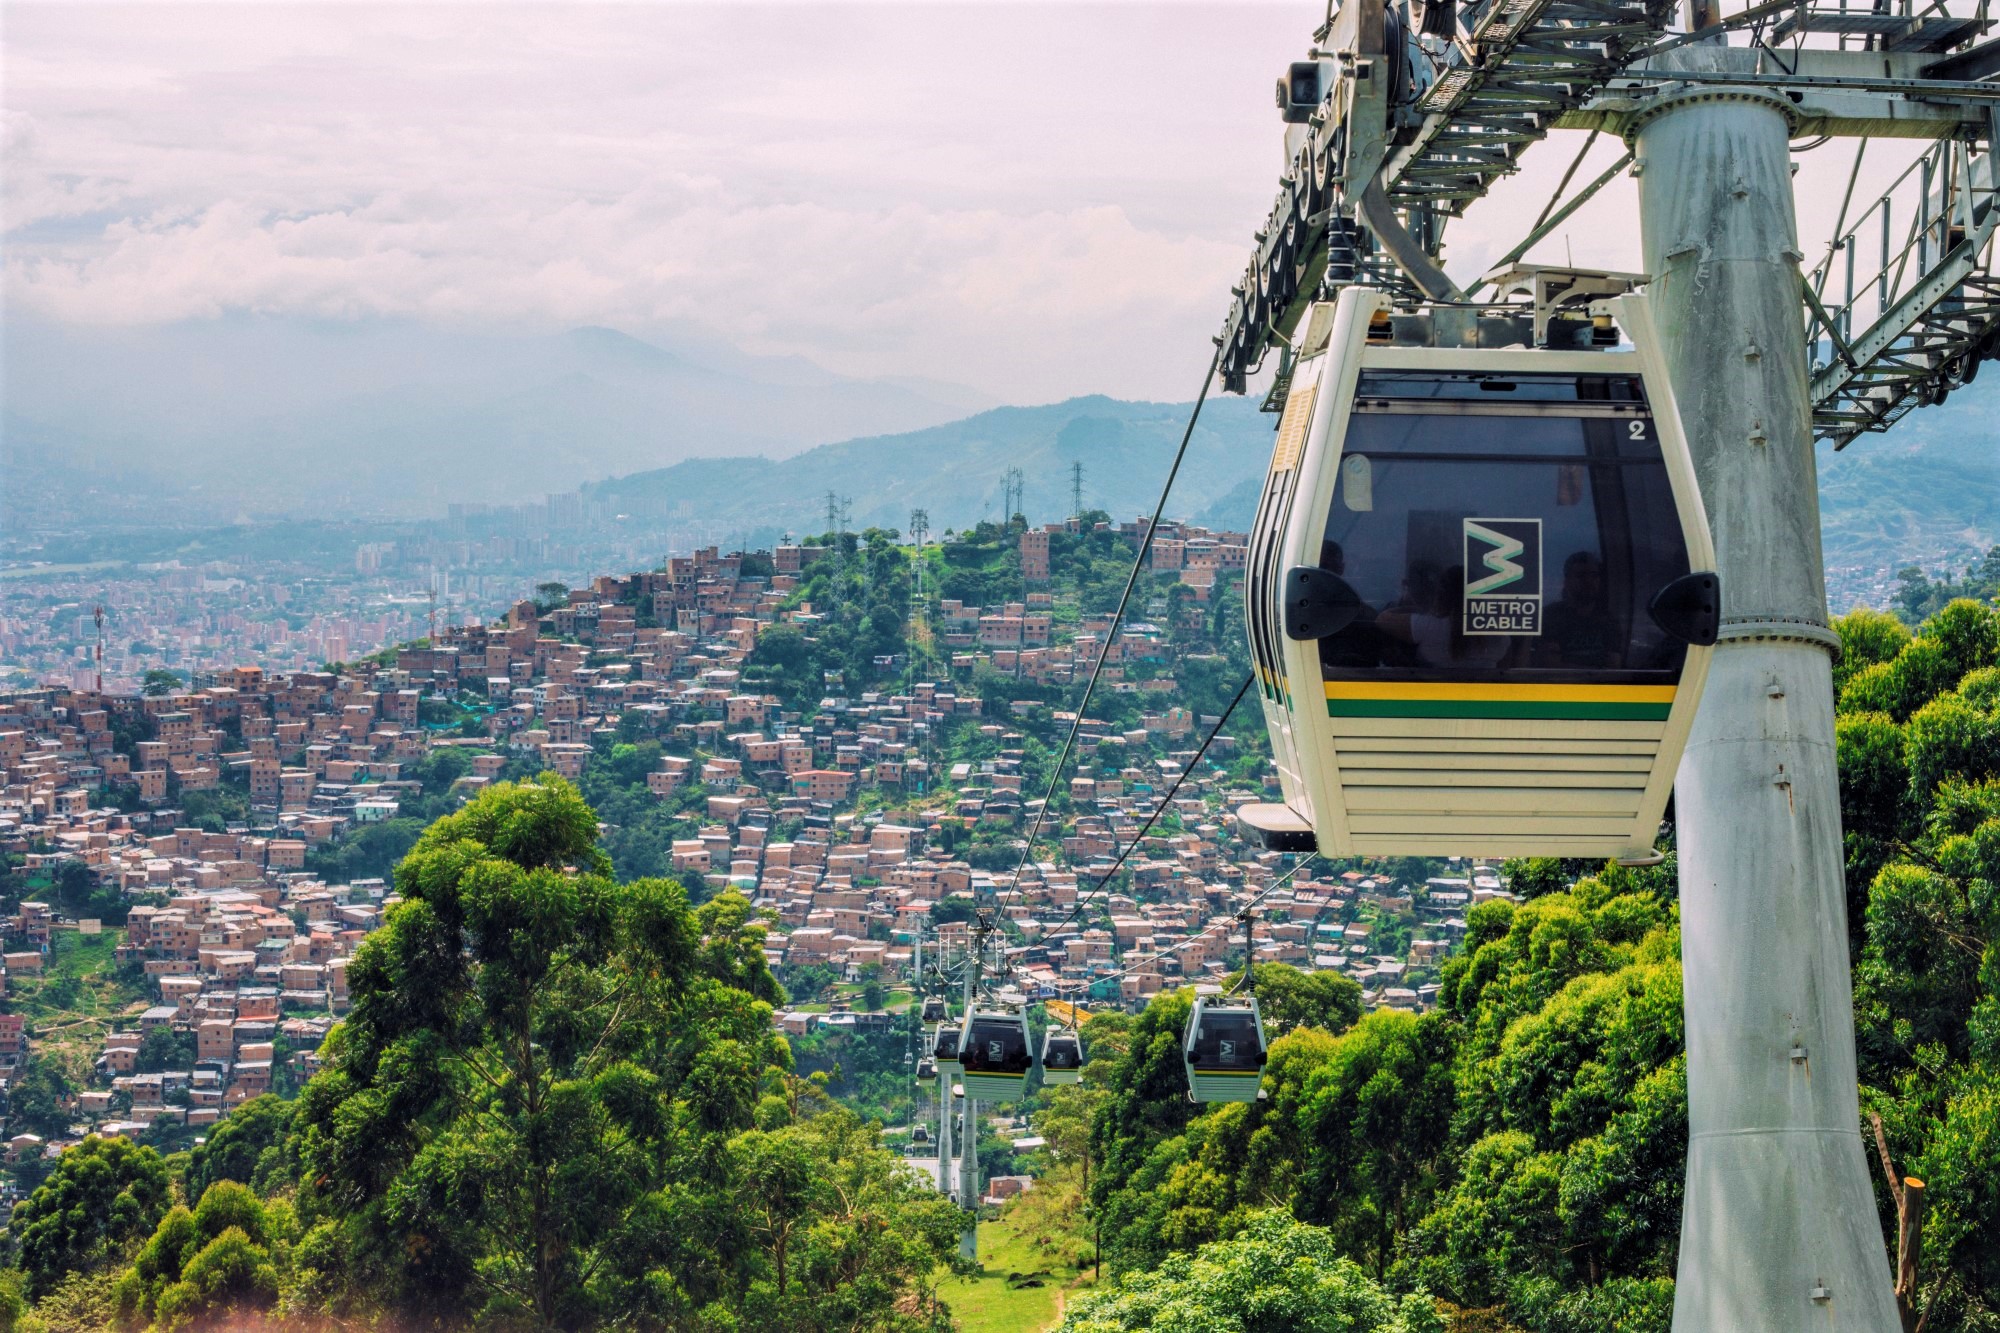 Cable Cars in Medellin, Colombia